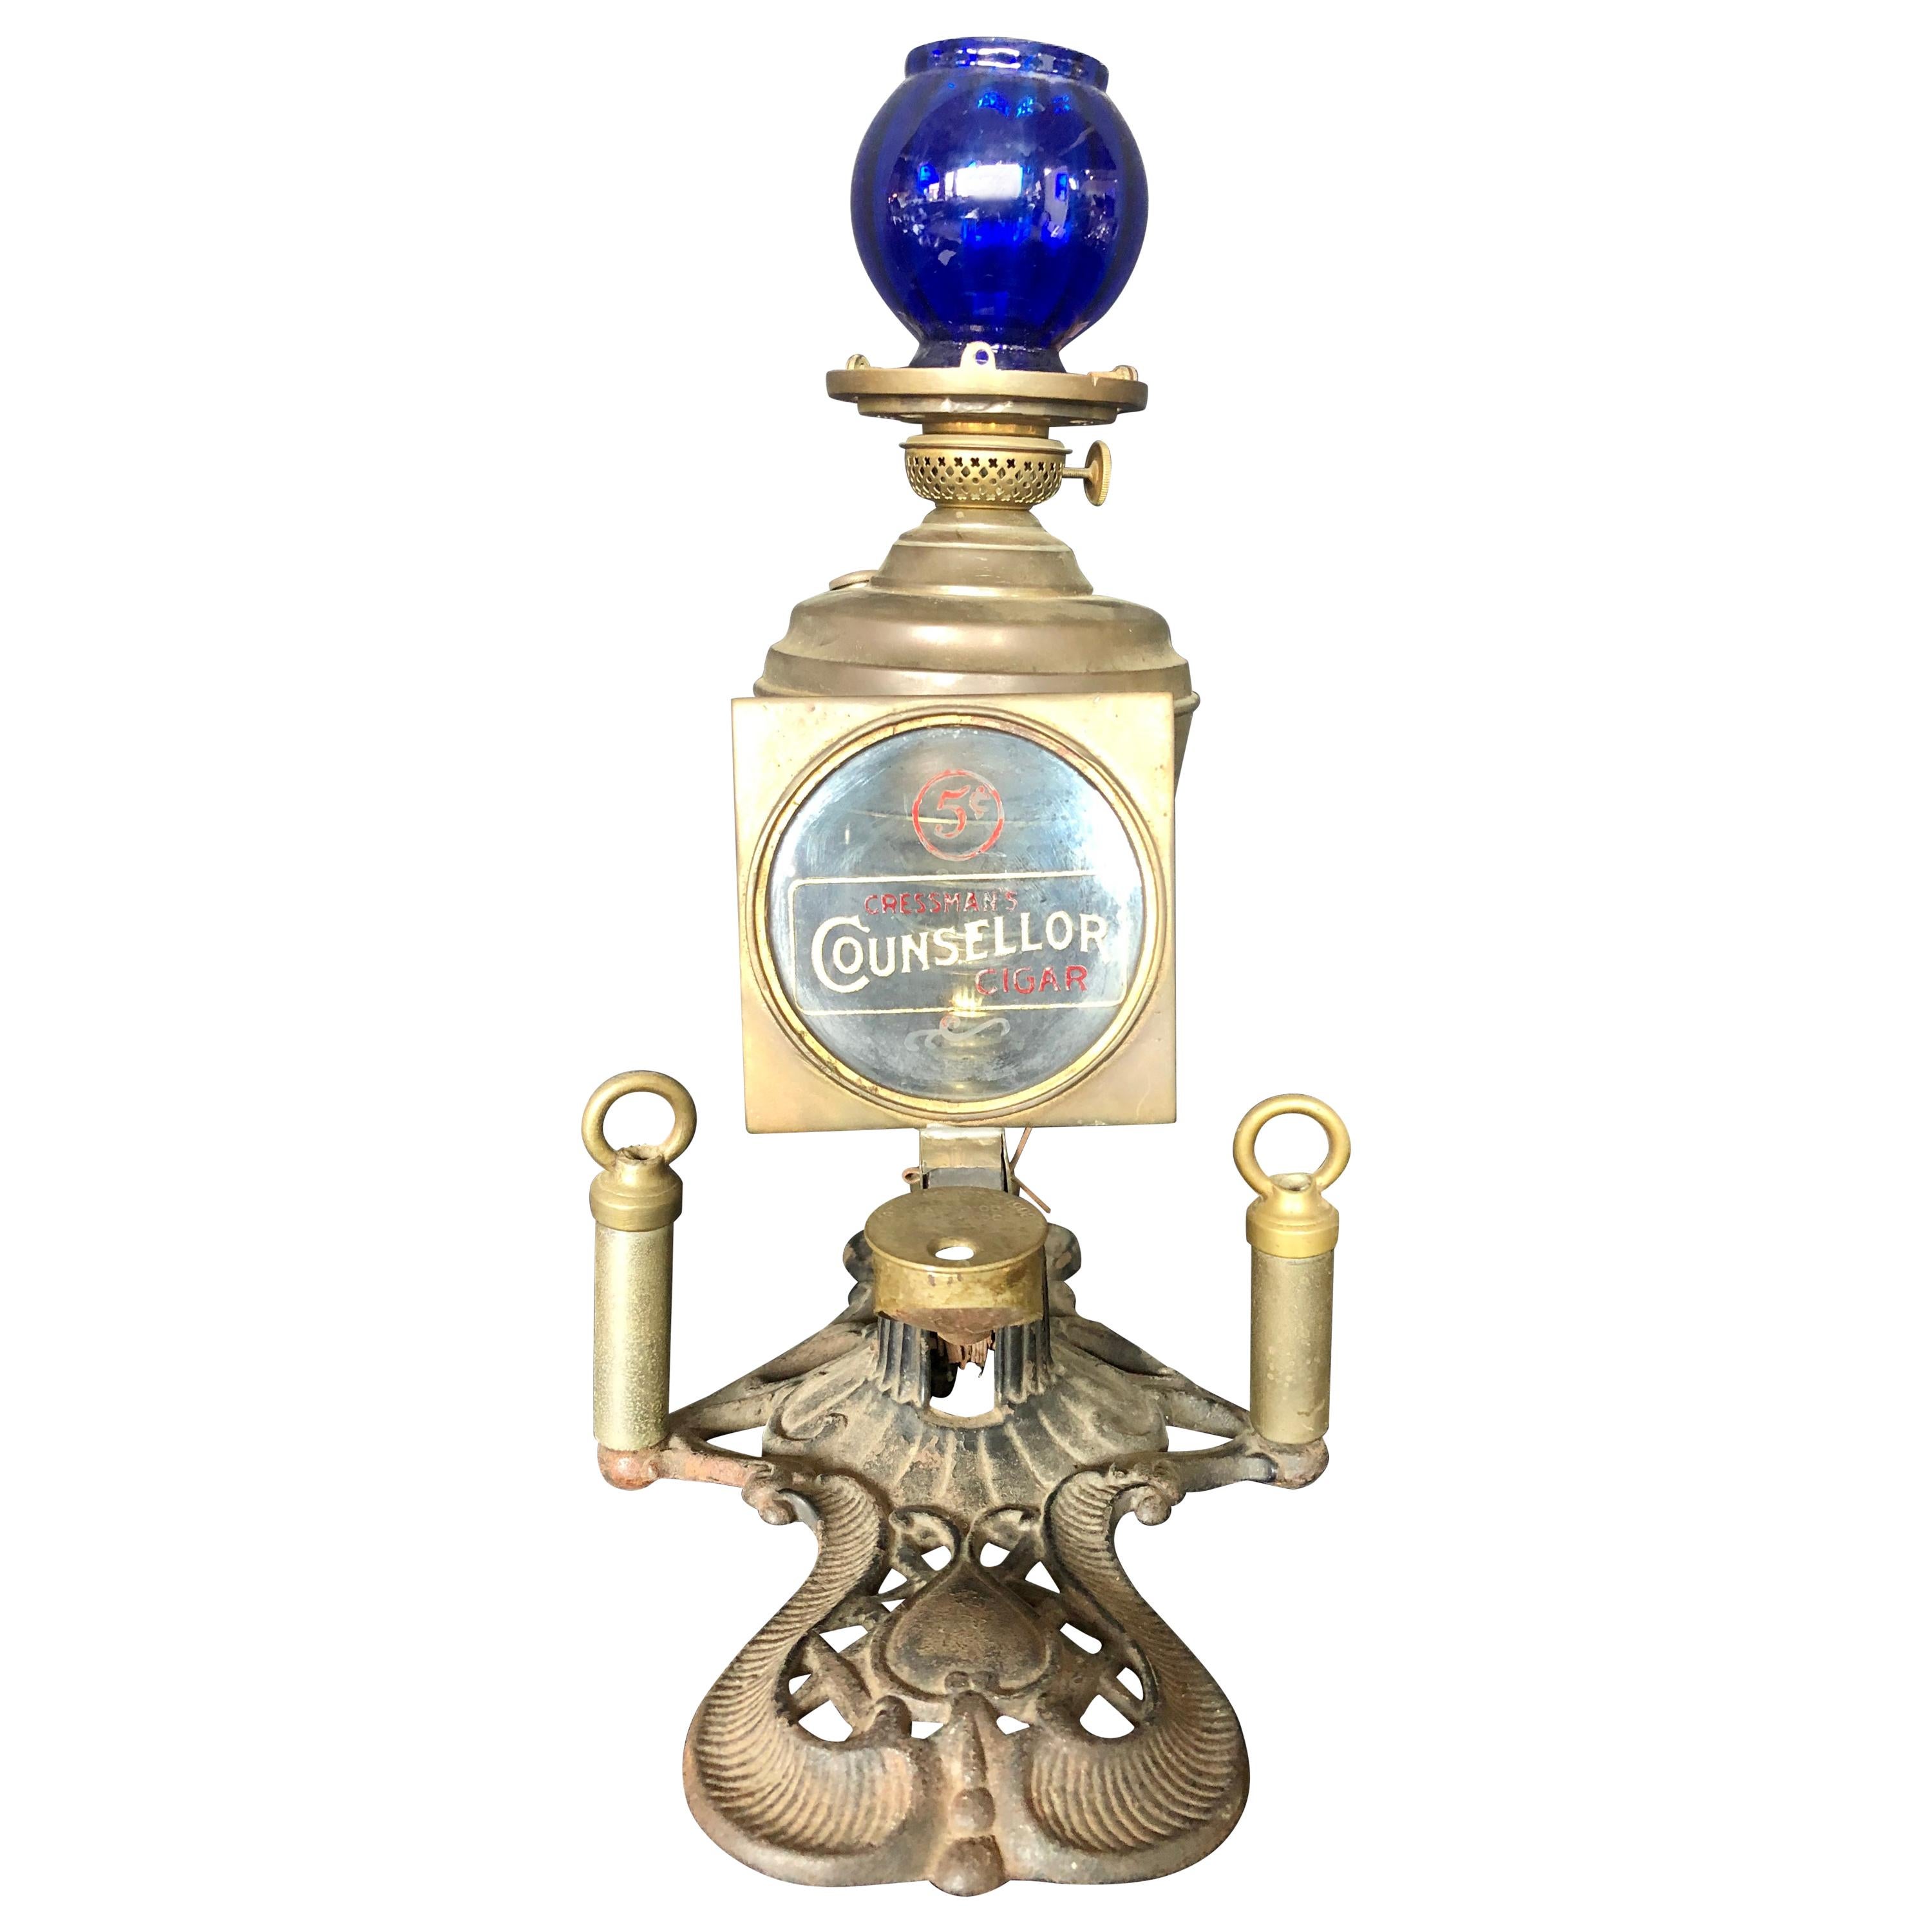 Cressman's Counsellor Cigar Lighter and Lamp with Blue Glass Globe